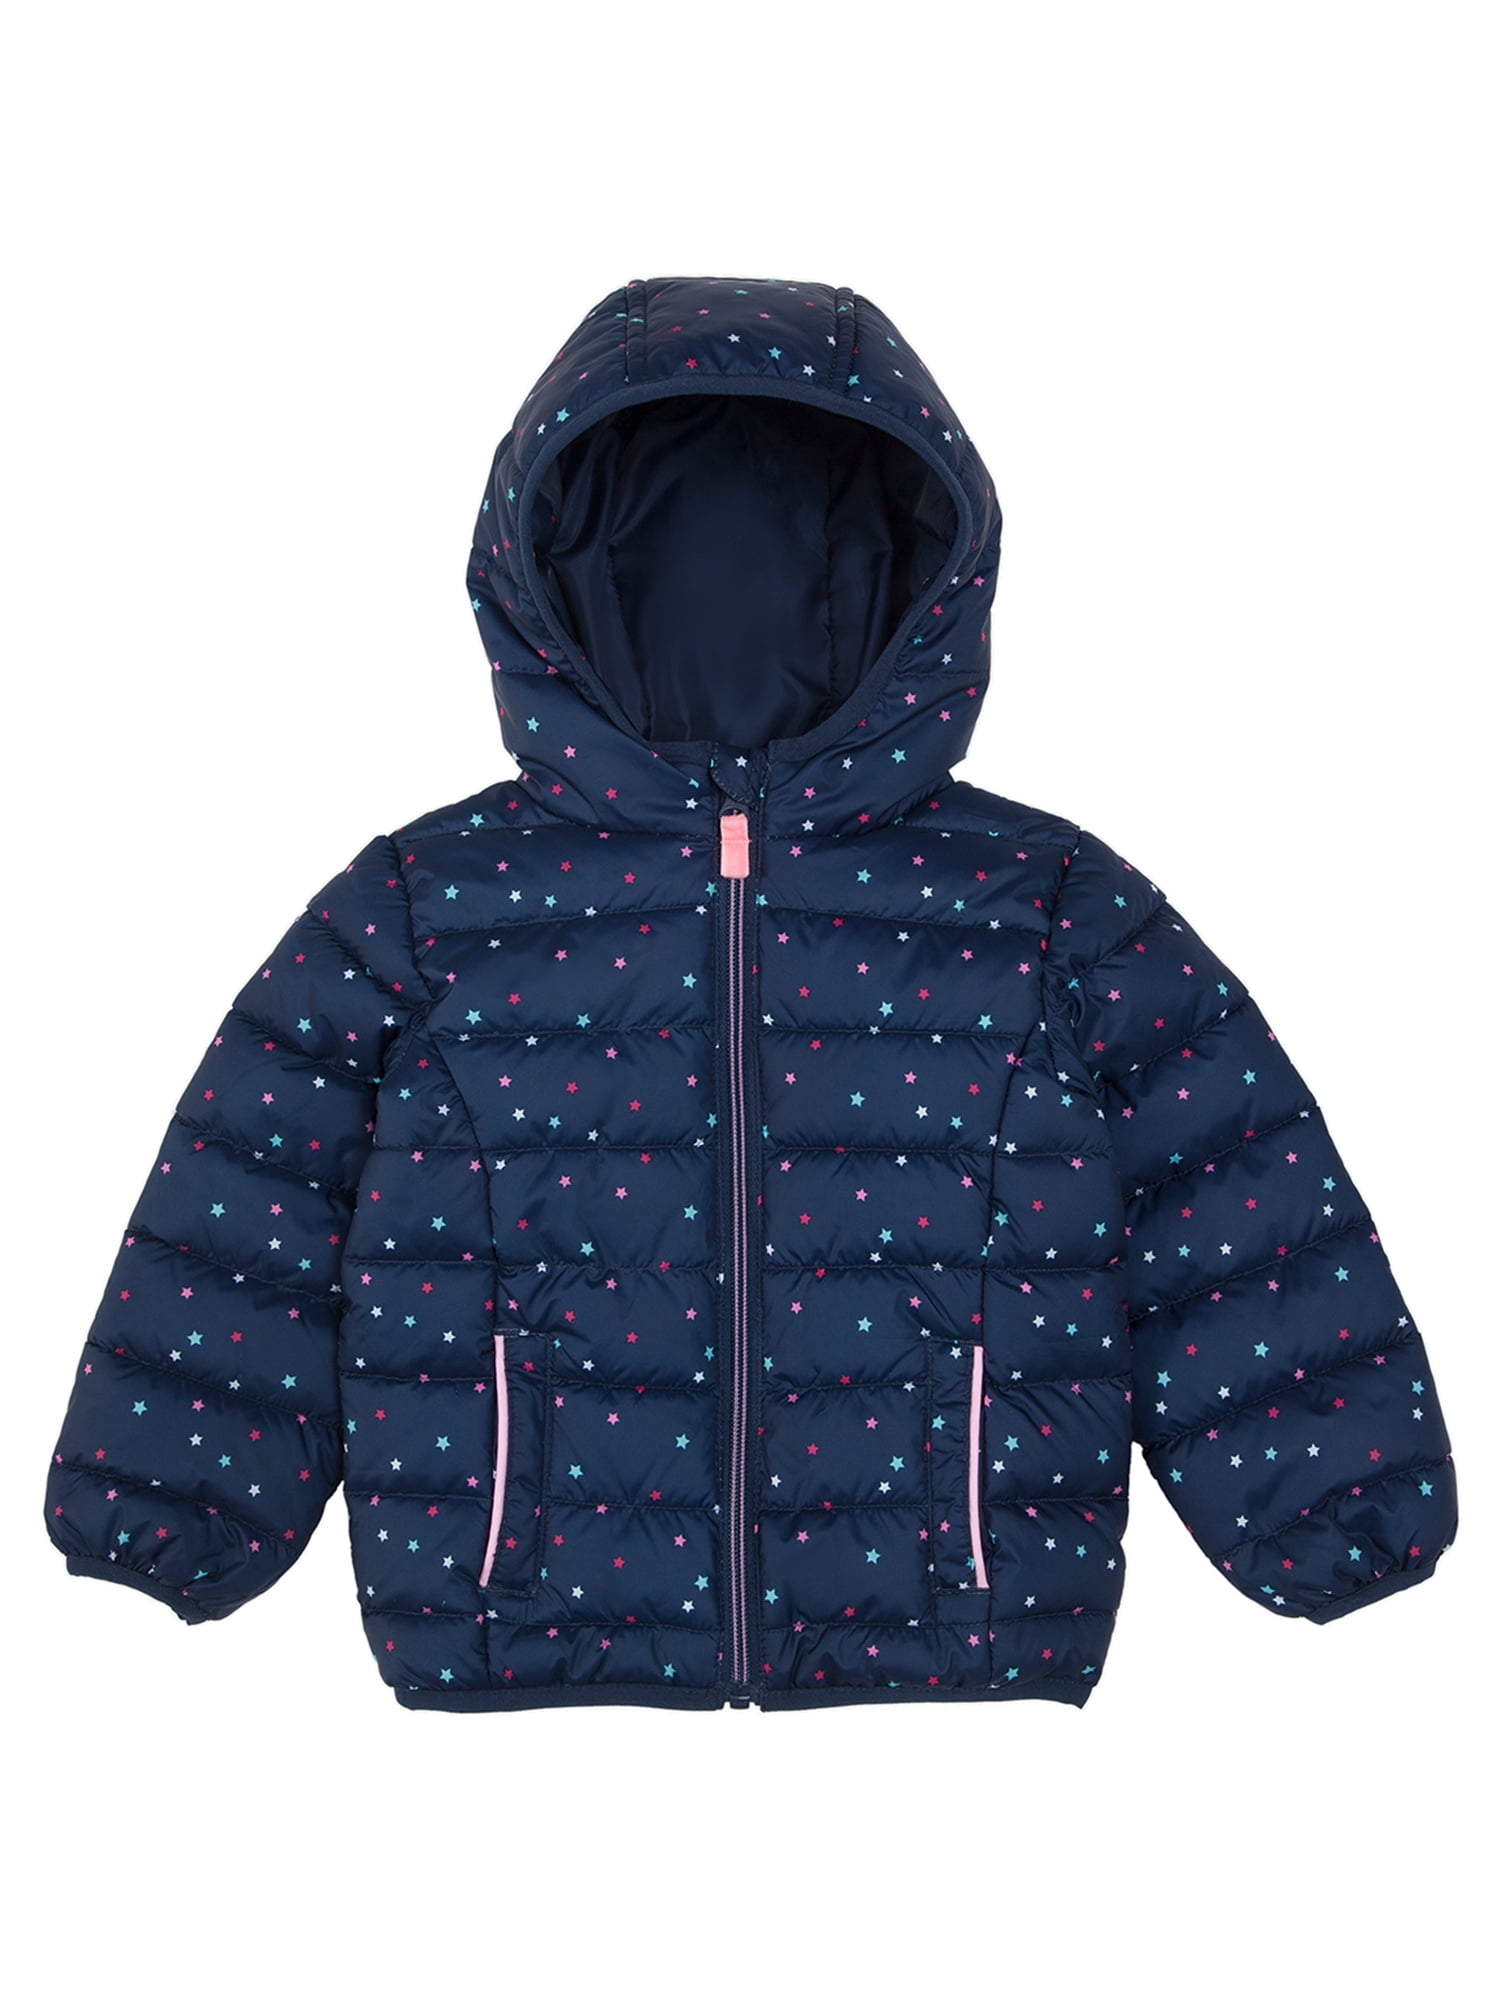 Game Technical Apparel Kids British Quilted Wax Rain Jacket/Padded Coat for Boys & Girls